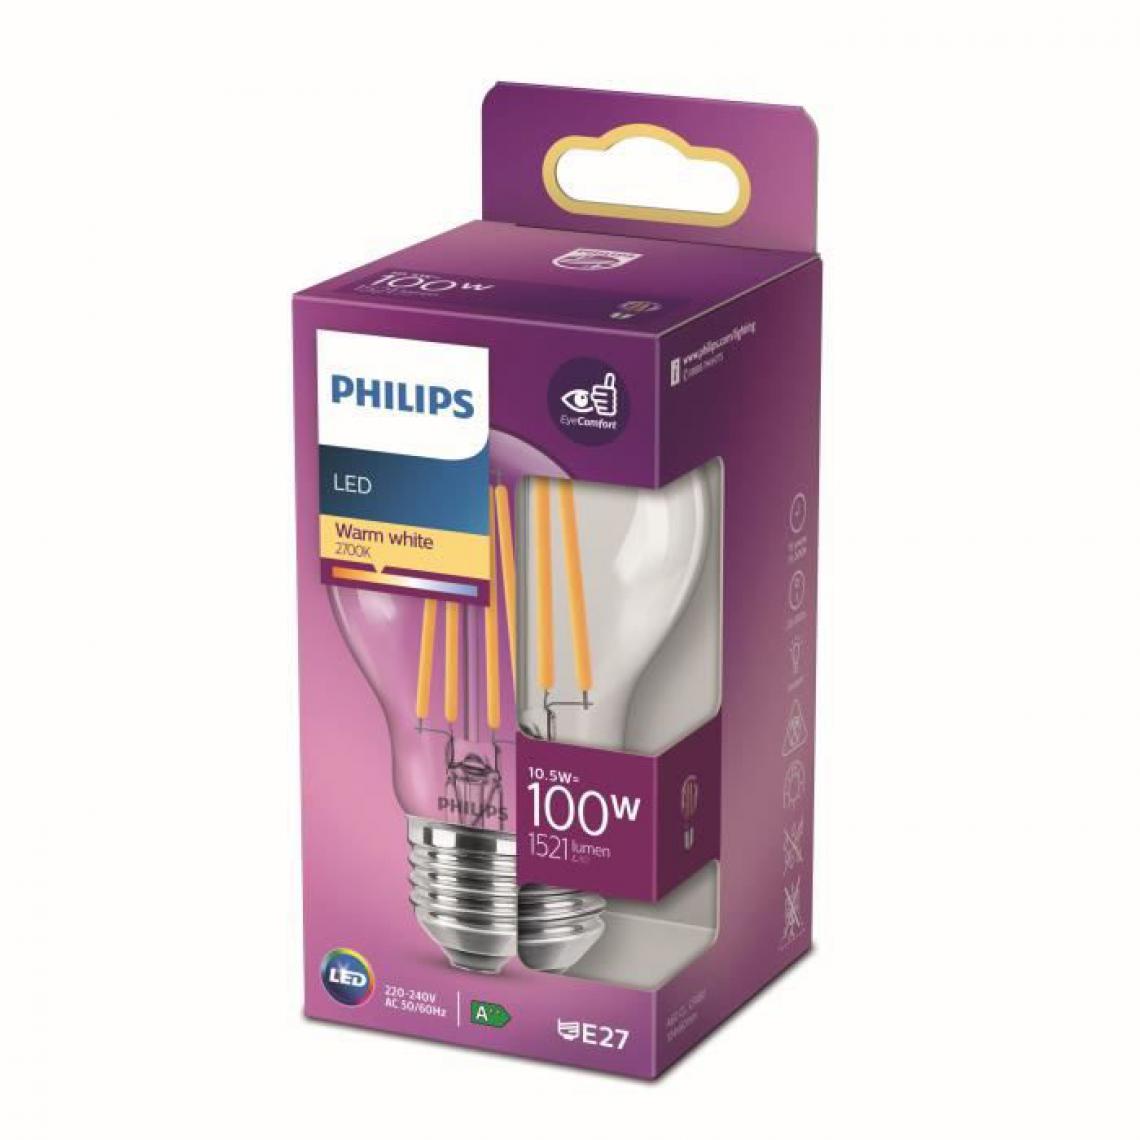 Philips - Philips ampoule LED Equivalent 100W E27 Blanc chaud non dimmable - Ampoules LED